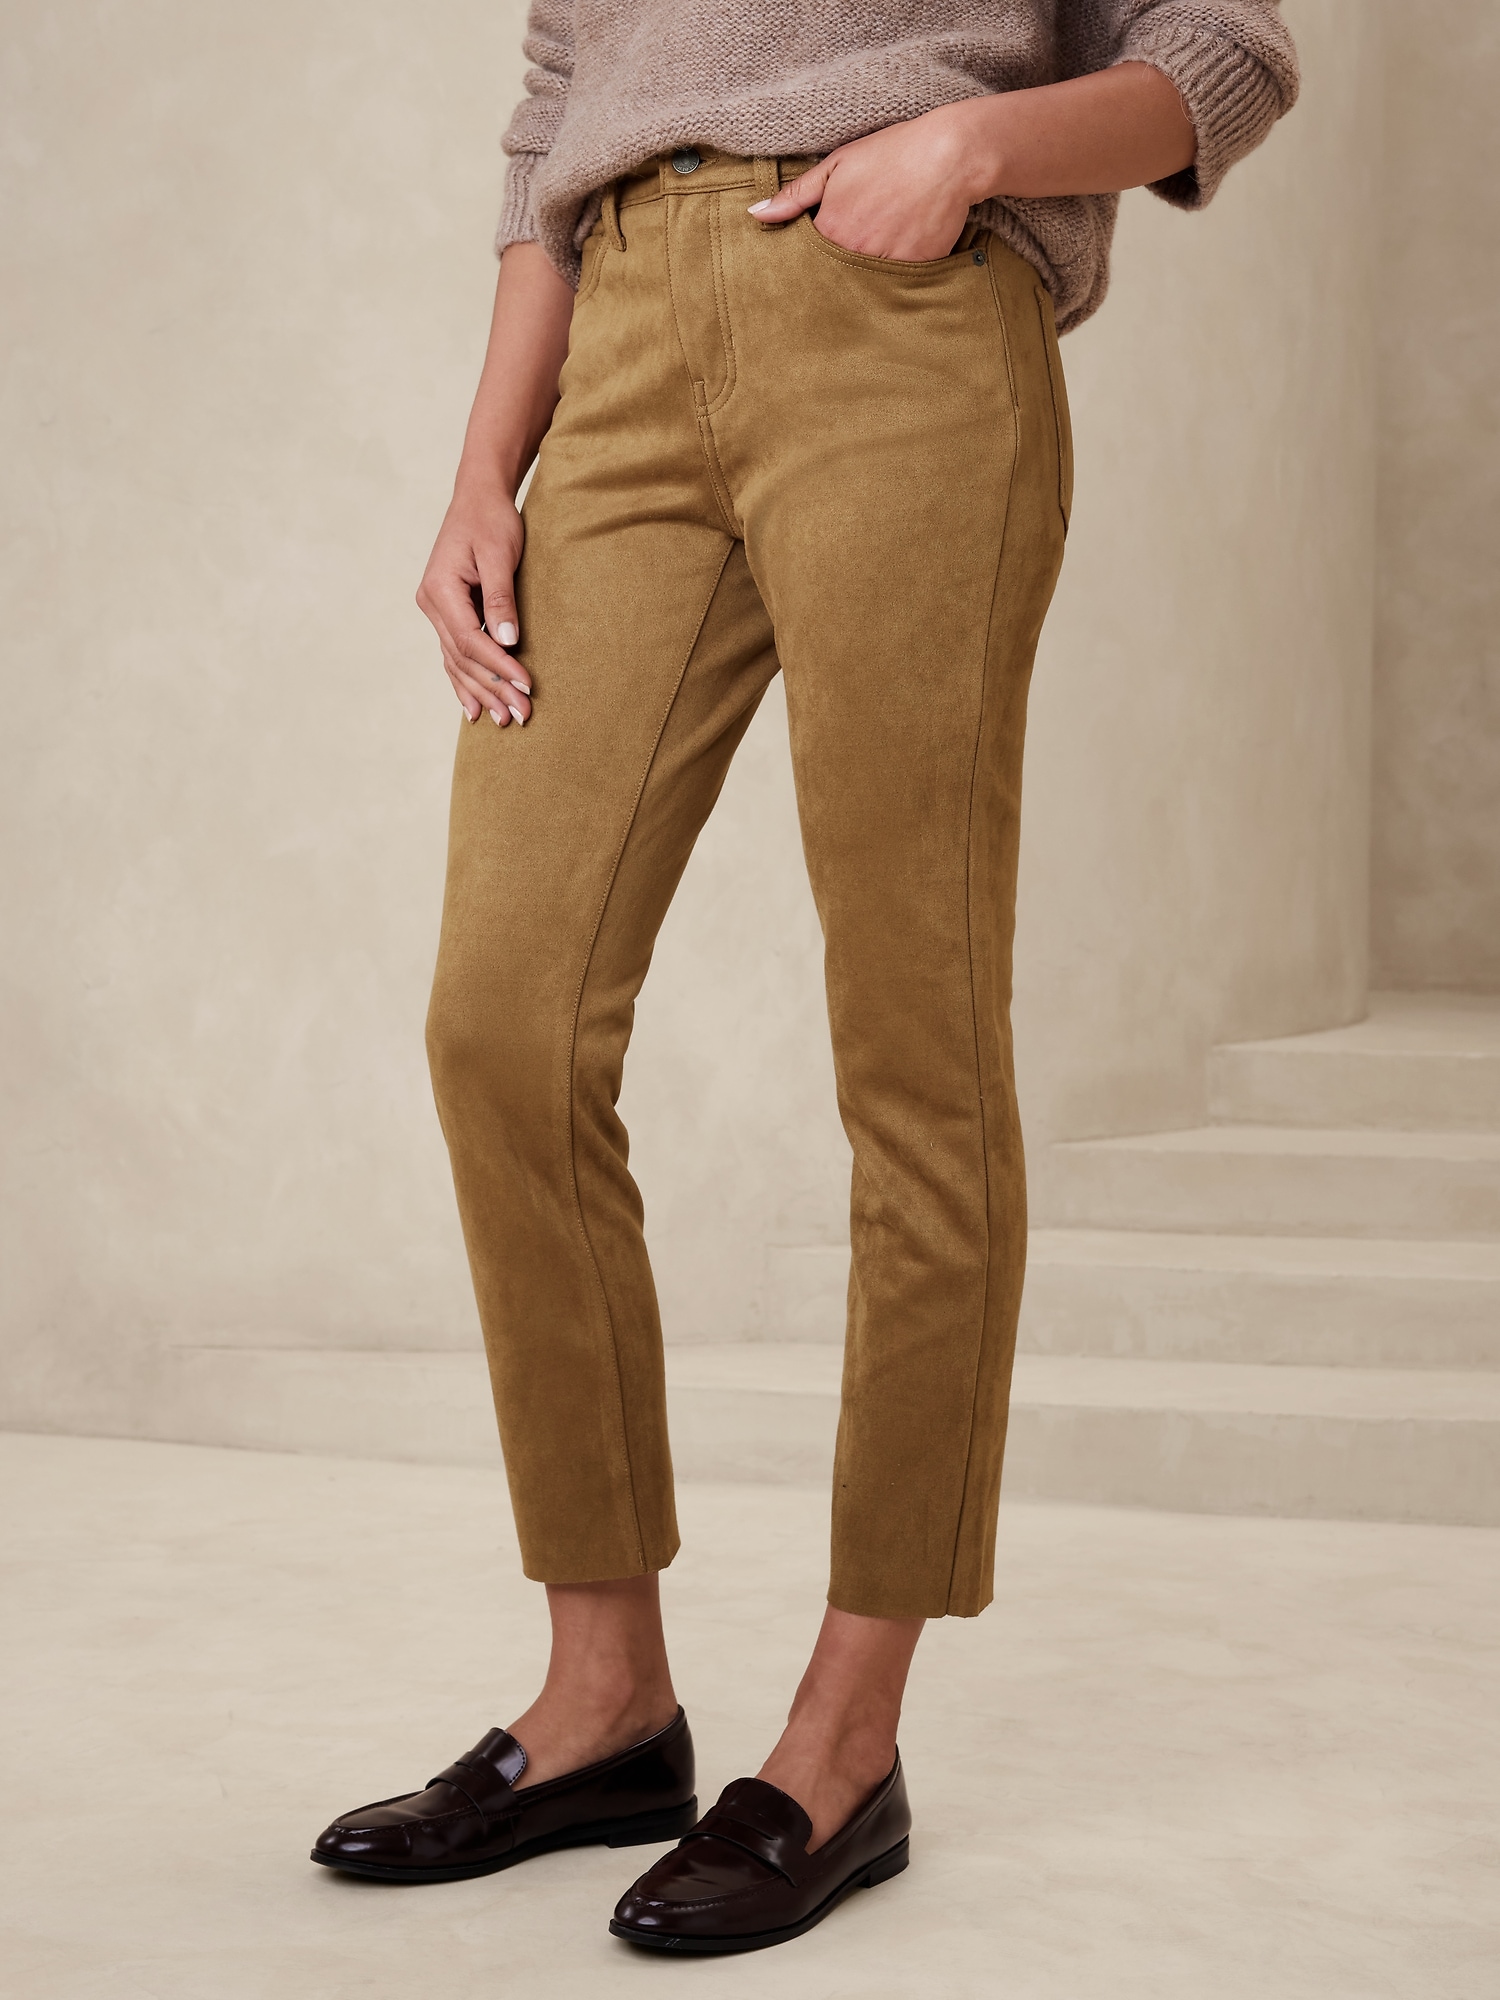 Banana Republic Olive Womens Size 10 Long Pants – Twice As Nice Consignments